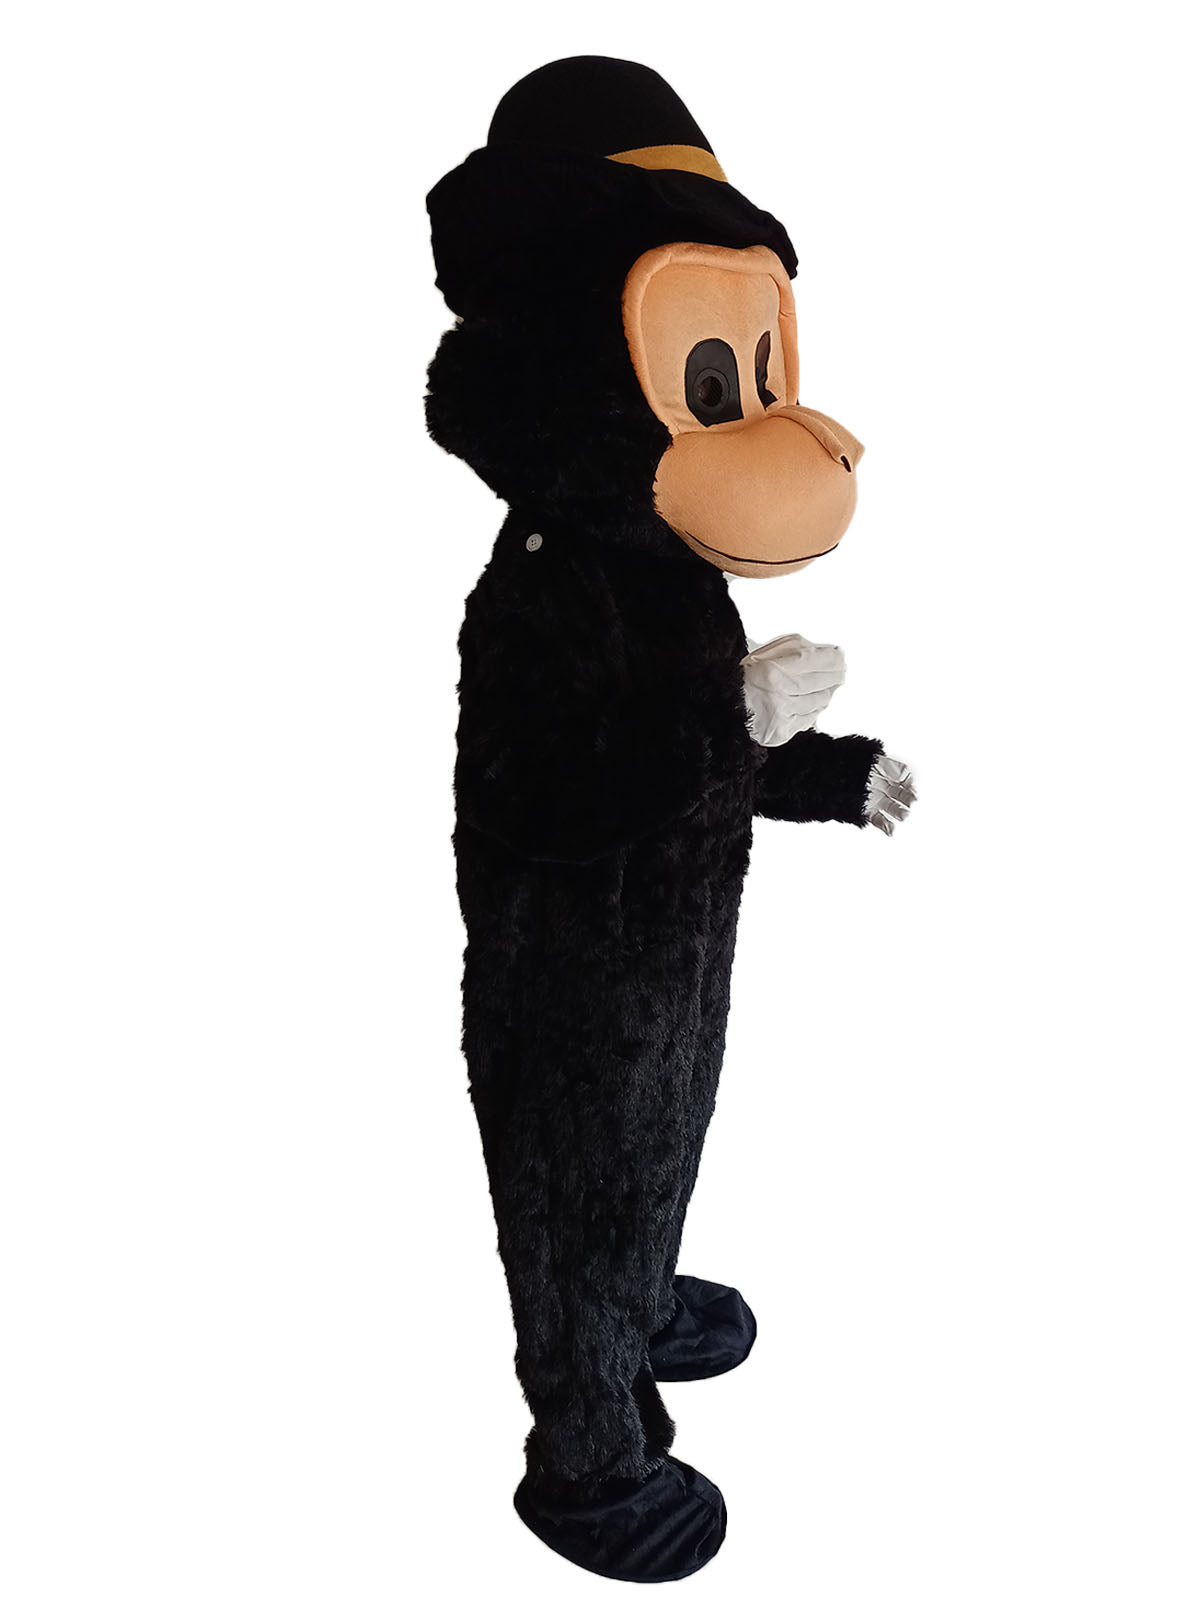 George Curious Cartoon Monkey Costume Mascots Complete Professional